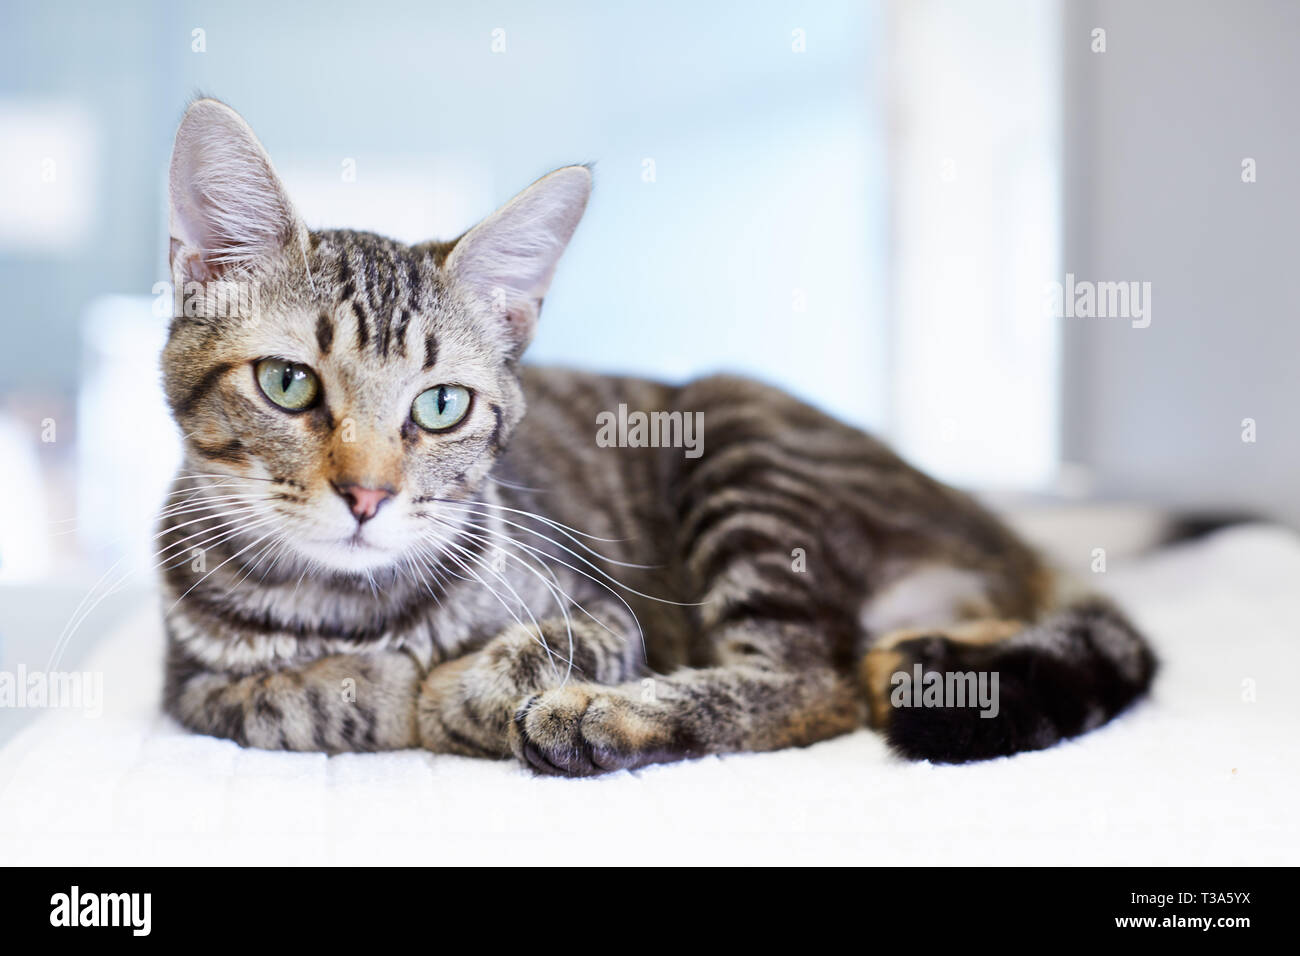 A young gray tabby cat with big green eyes is sitting on a white blanket and feels comfortable Stock Photo